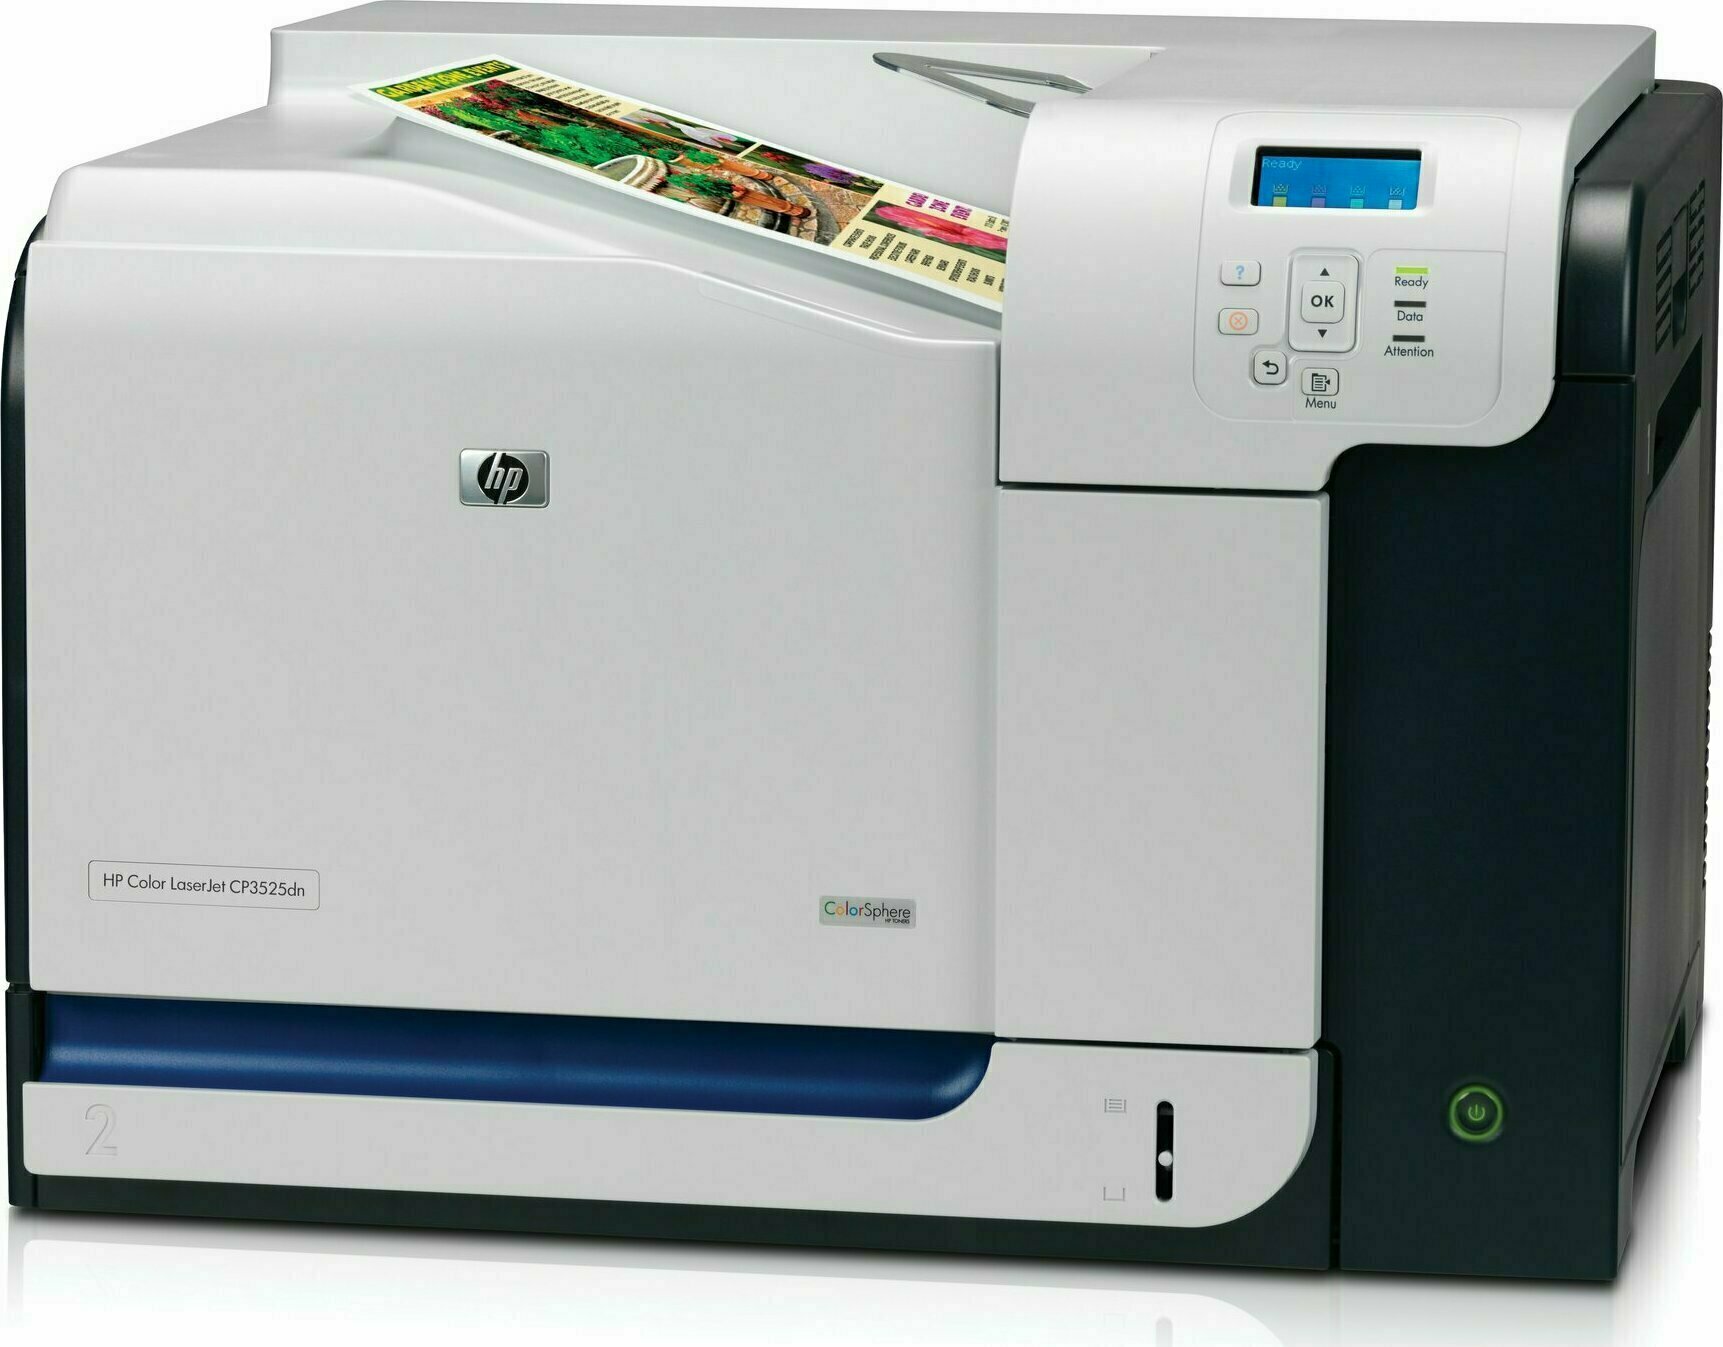 HP Color LaserJet CP3525DN | Full Specifications